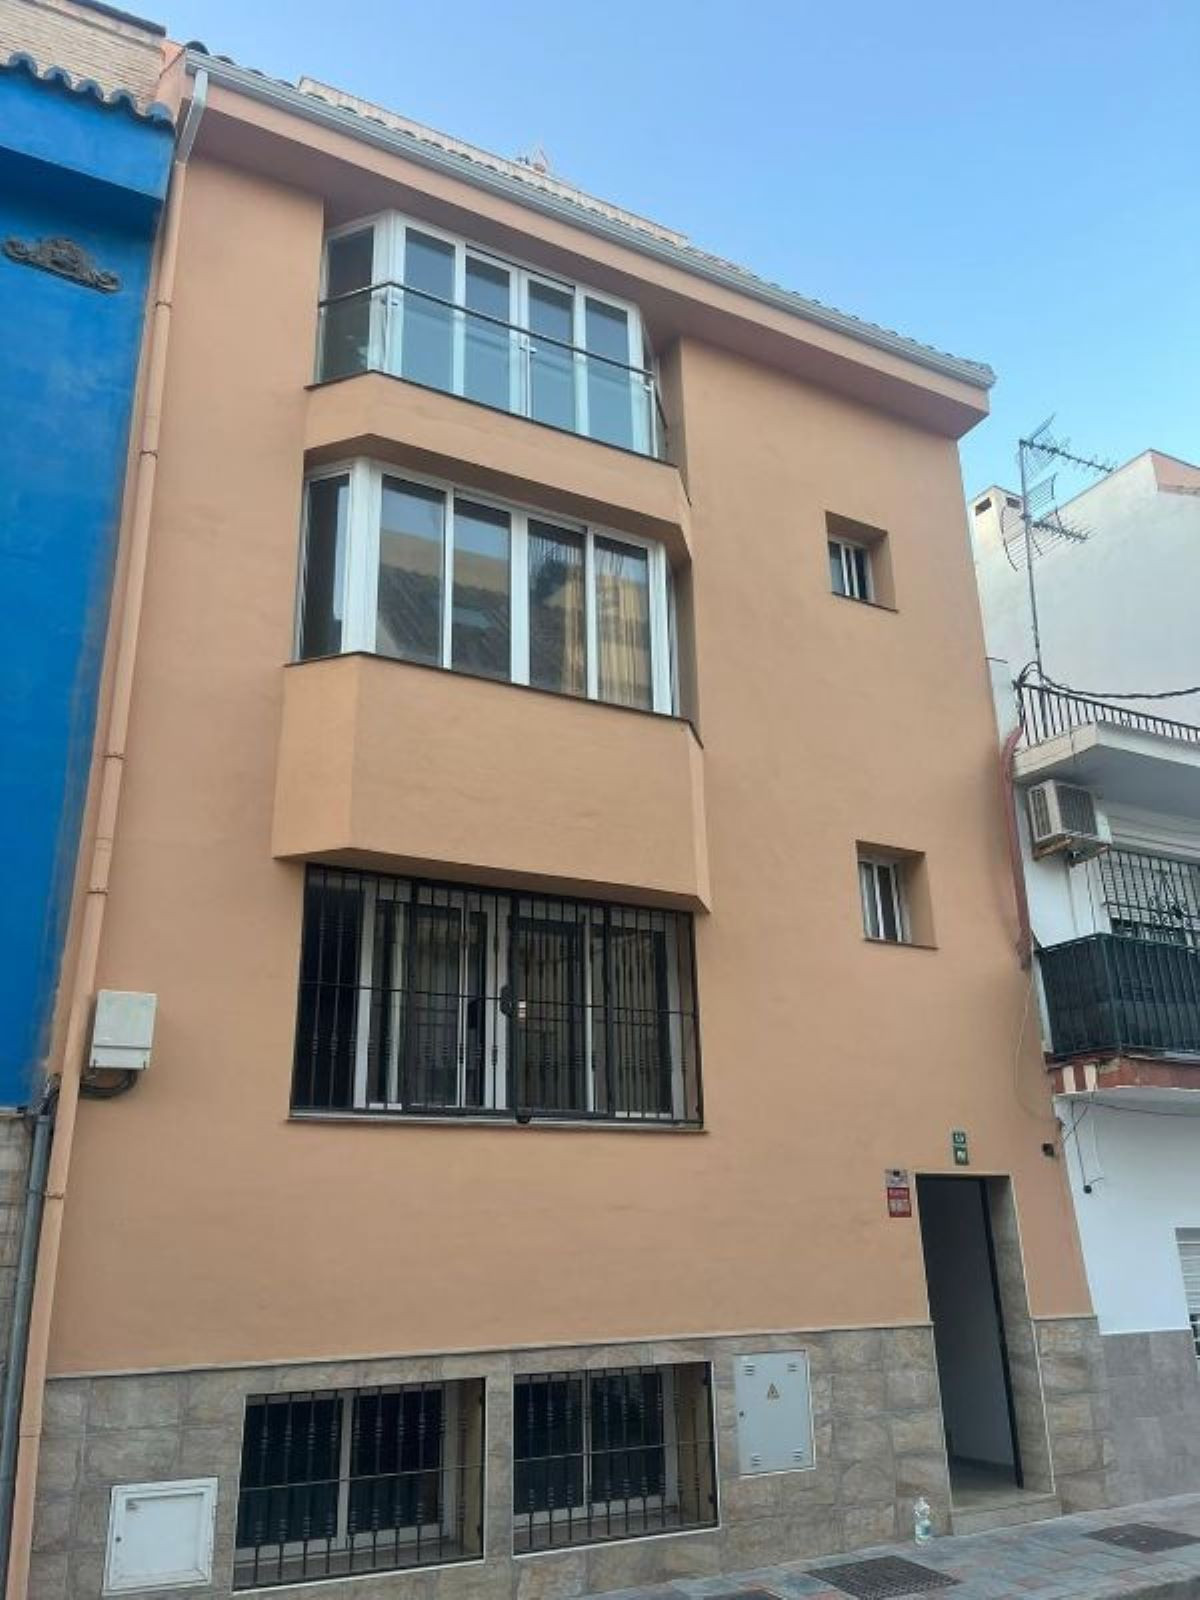 						Commercial  Other
													for sale 
																			 in Fuengirola
					